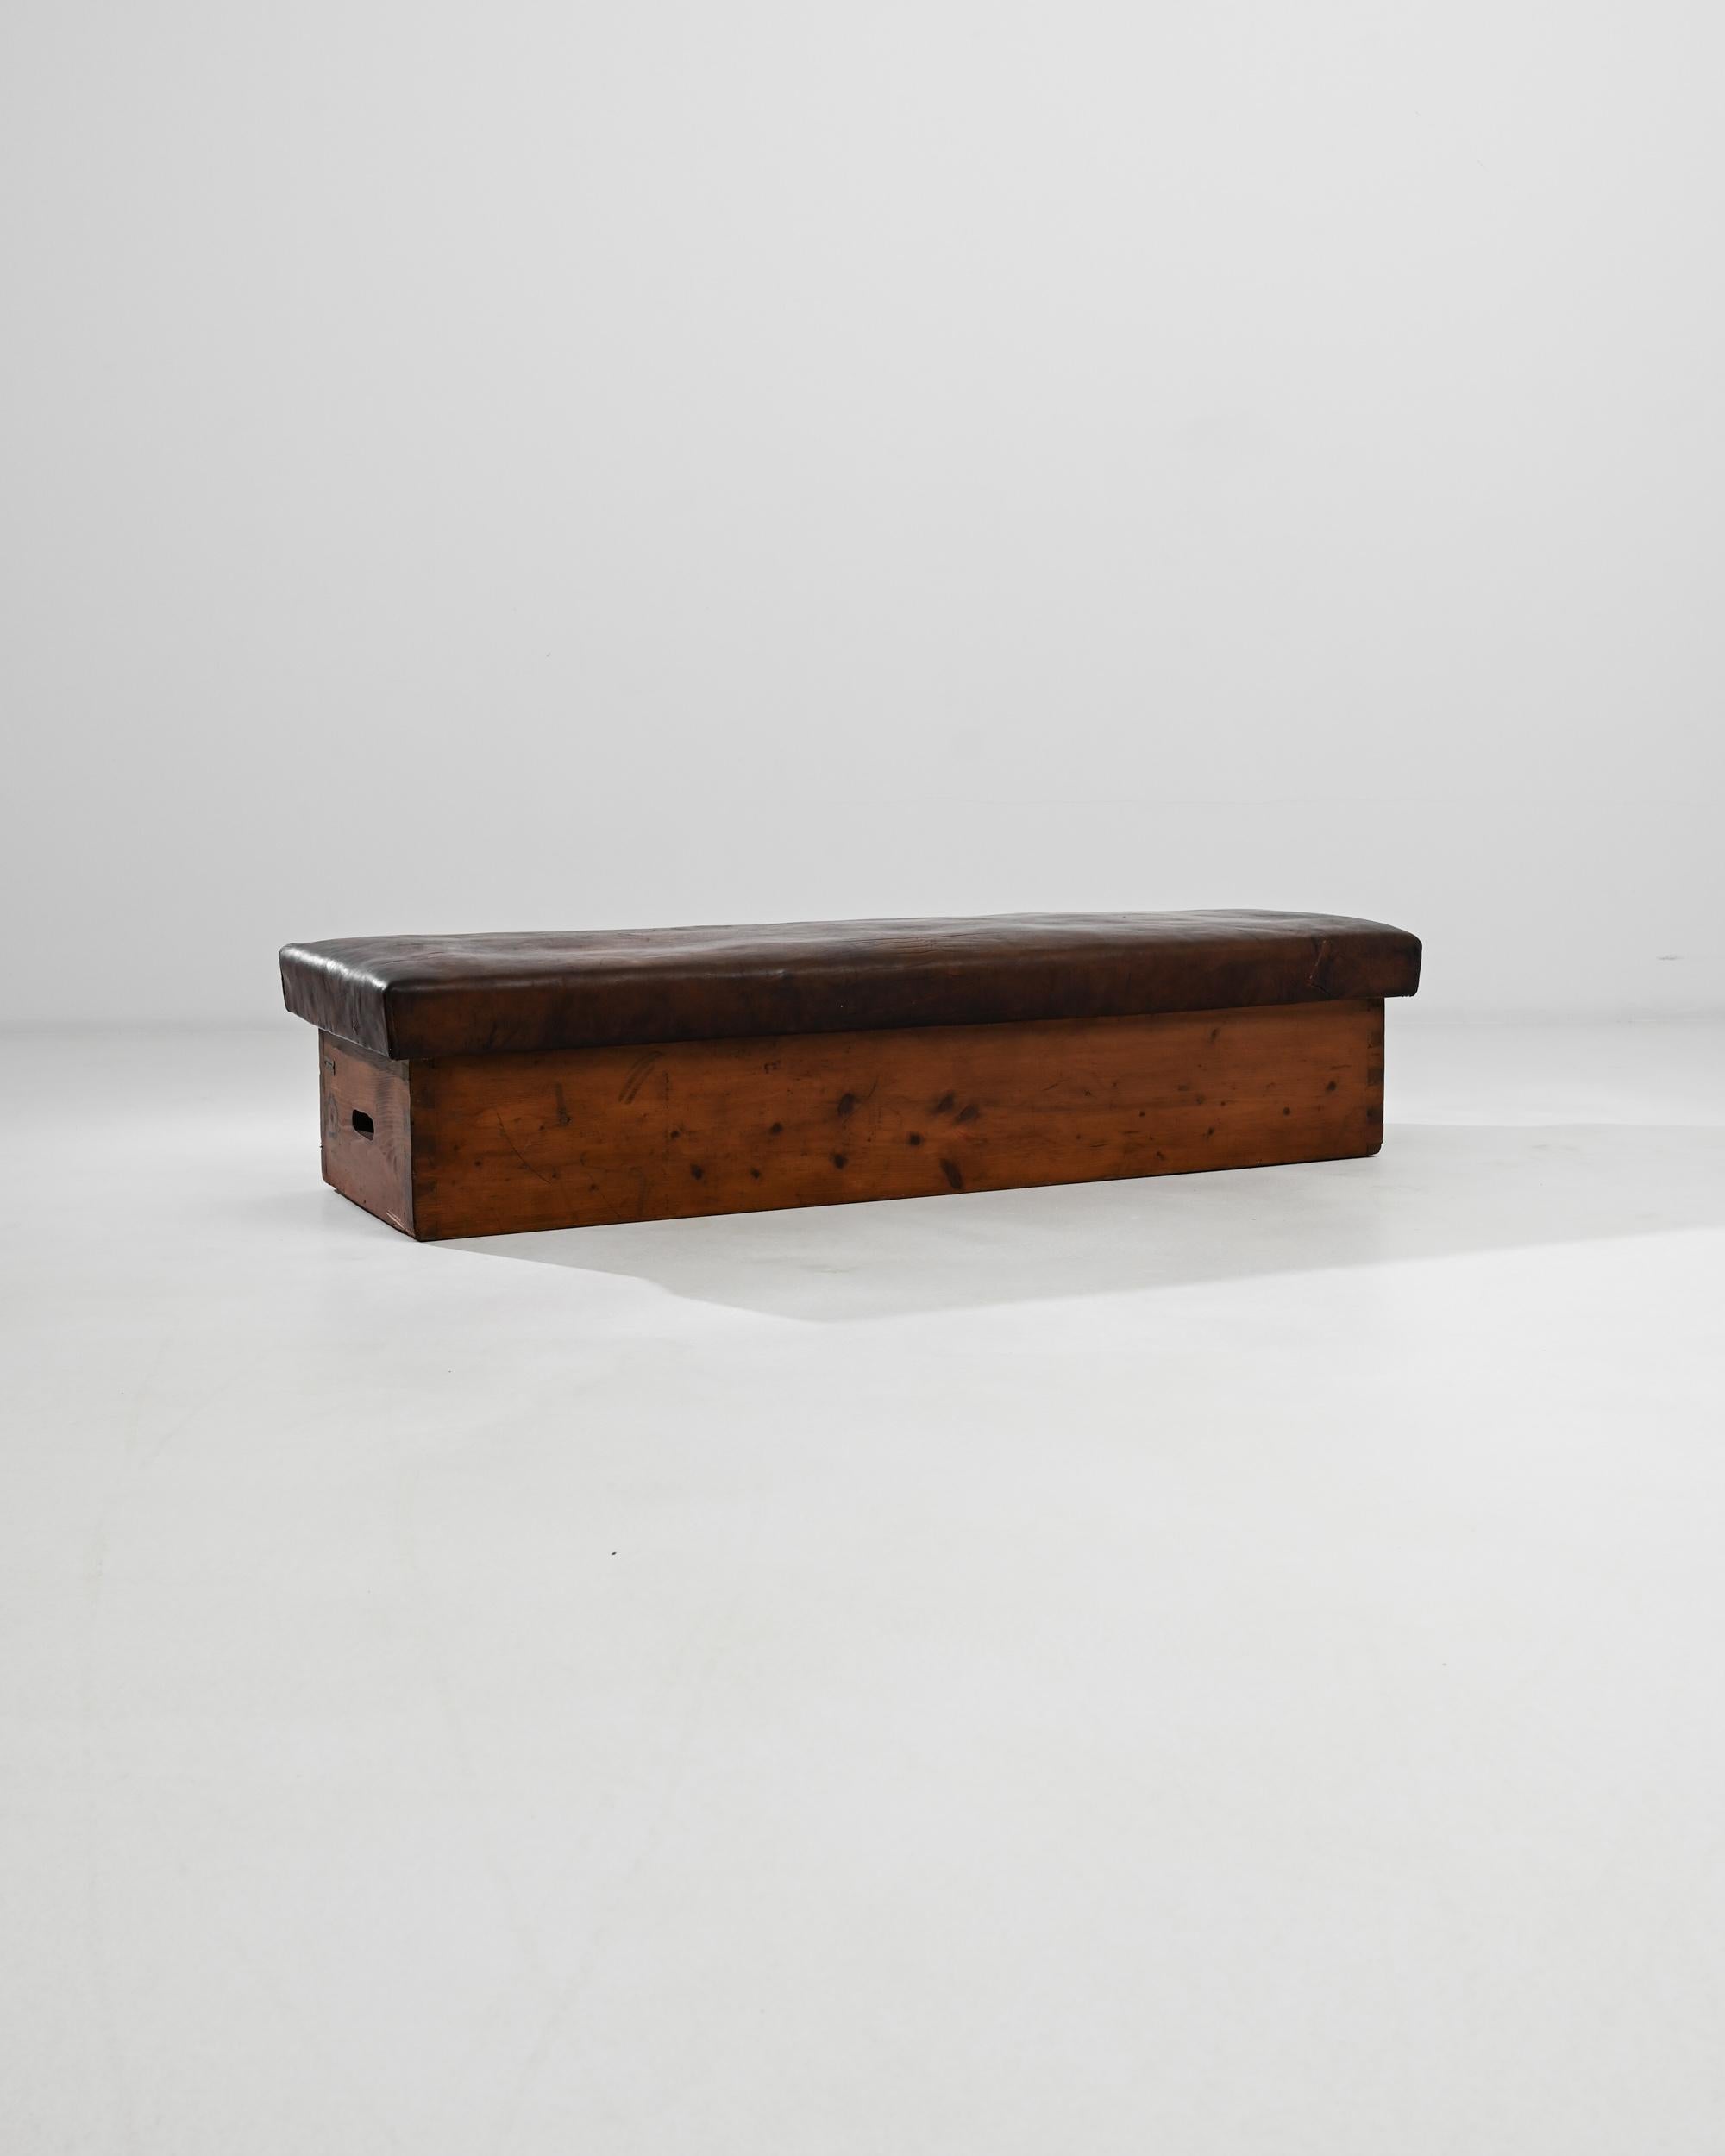 A vintage leather pommel horse from Central Europe. This long, unique bench, built for exercise, glows with a special warmth. Hand-stitched leather and box joints assemble this elegant and minimal piece. This bespoke bench emits a sense of